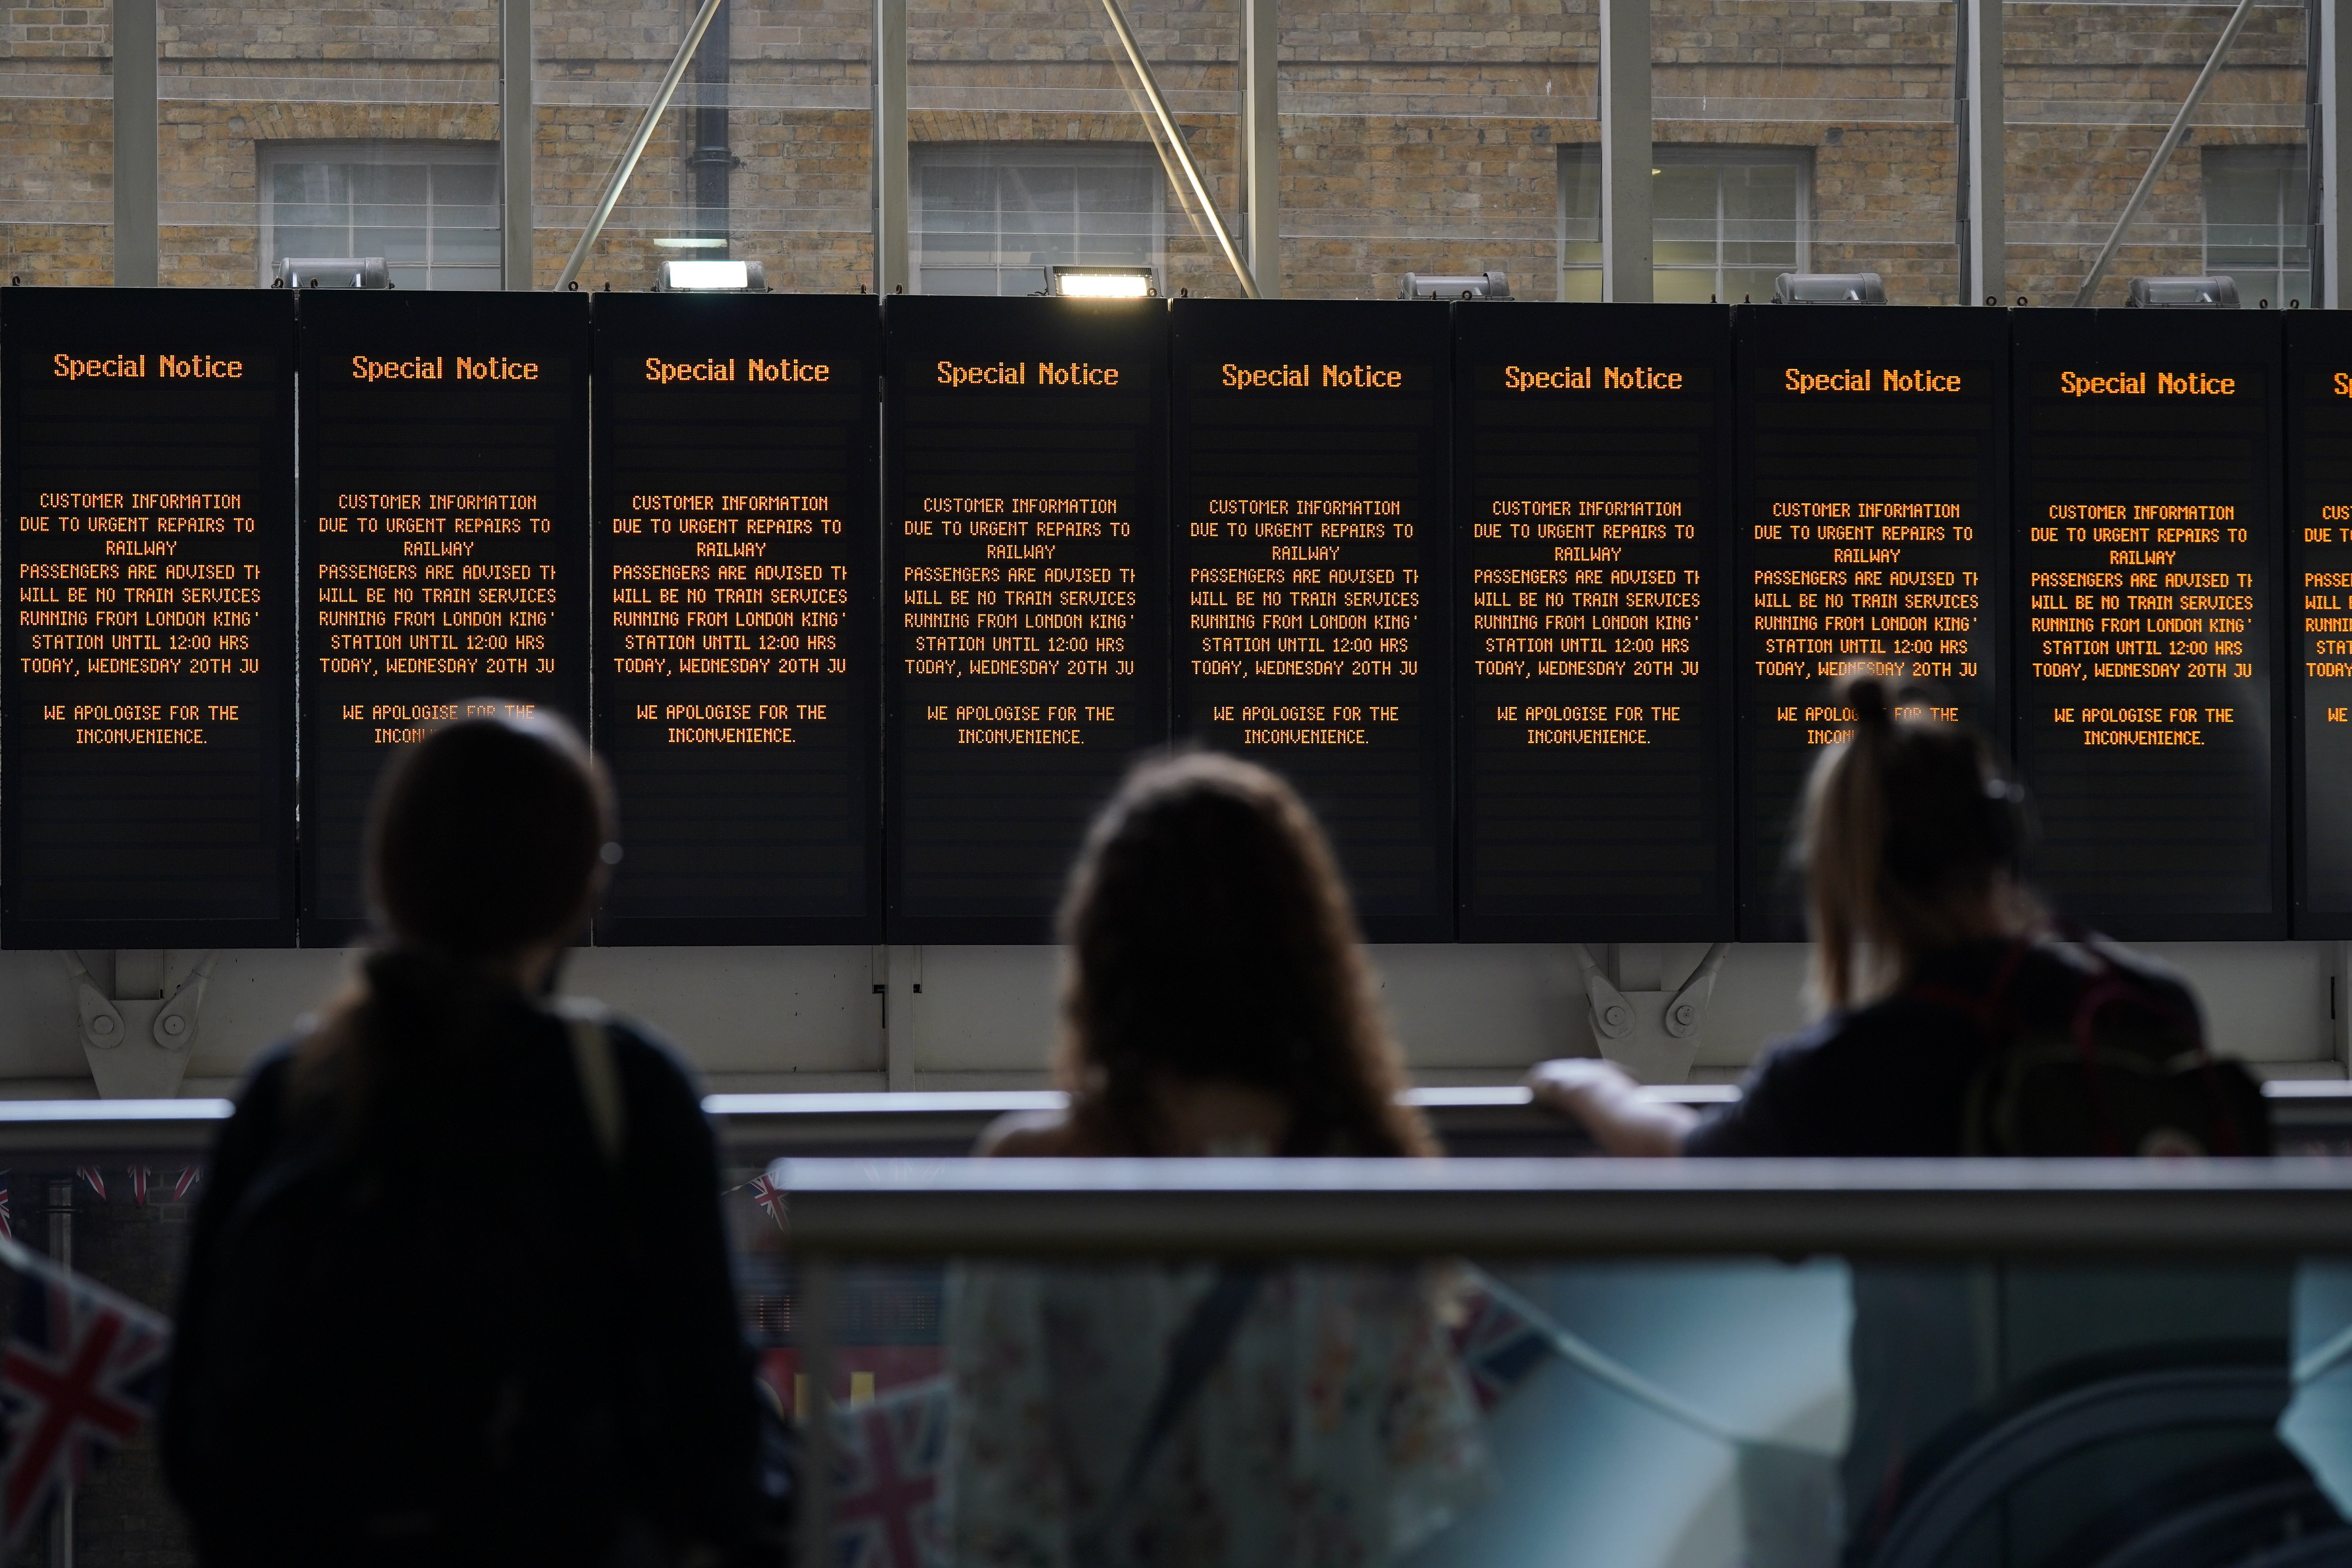 Passengers at King’s Cross station in London following train cancellations (Yui Mok/PA)